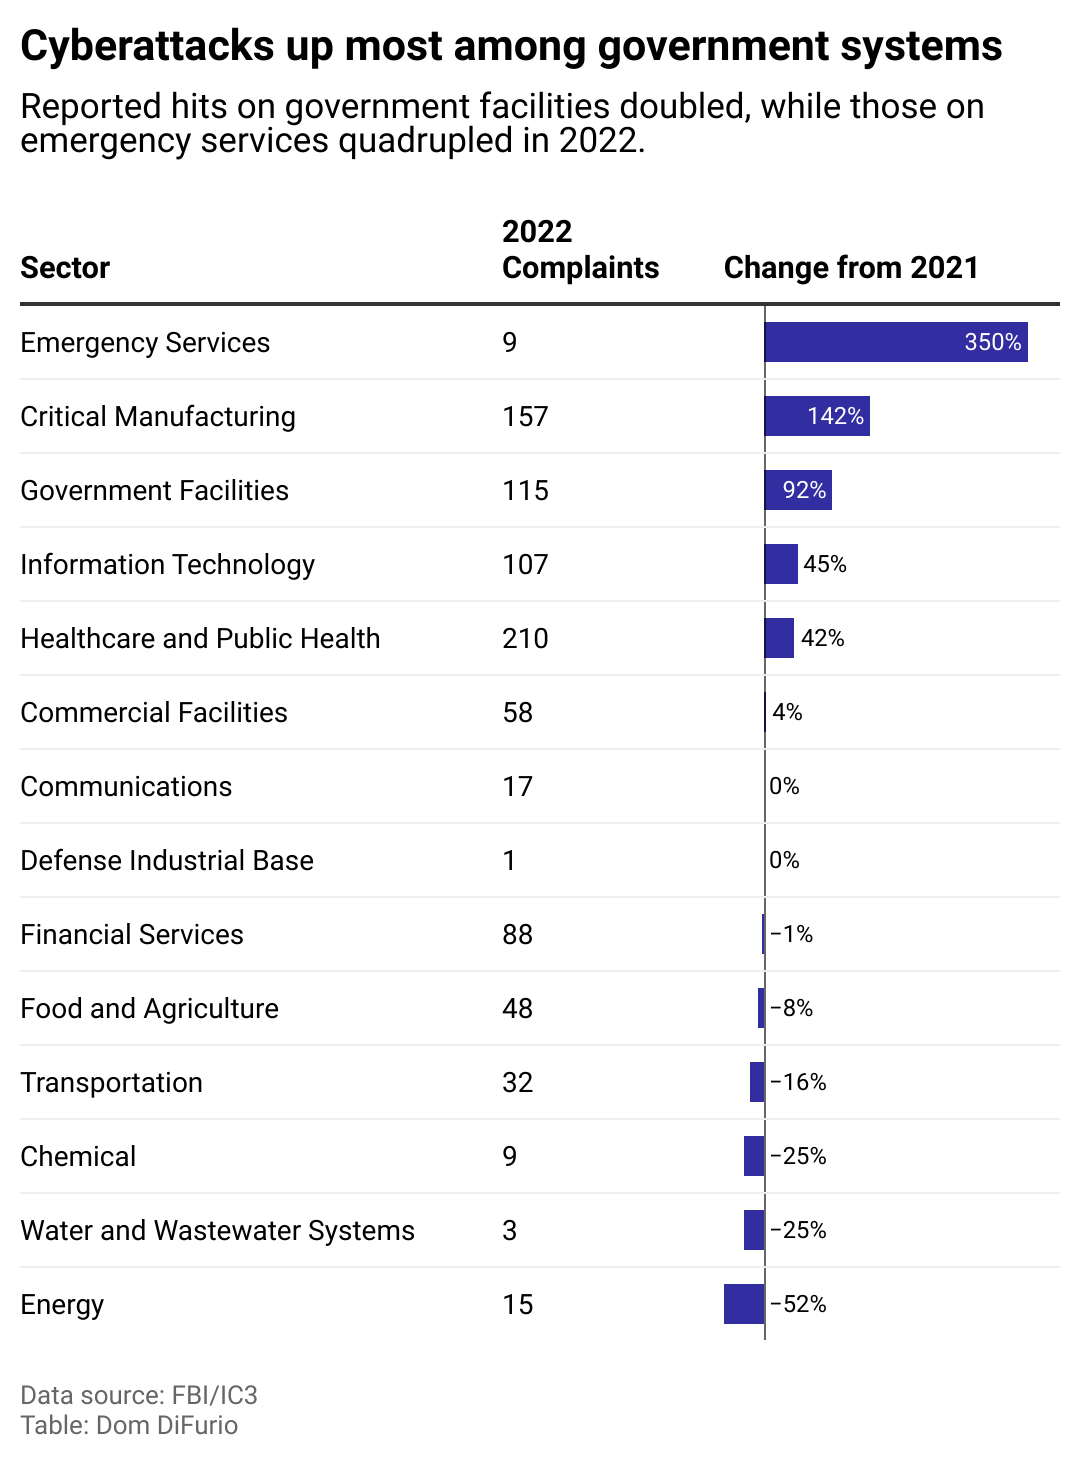 A table showing cyberattacks are up from 2021 to 2022 among most government systems.